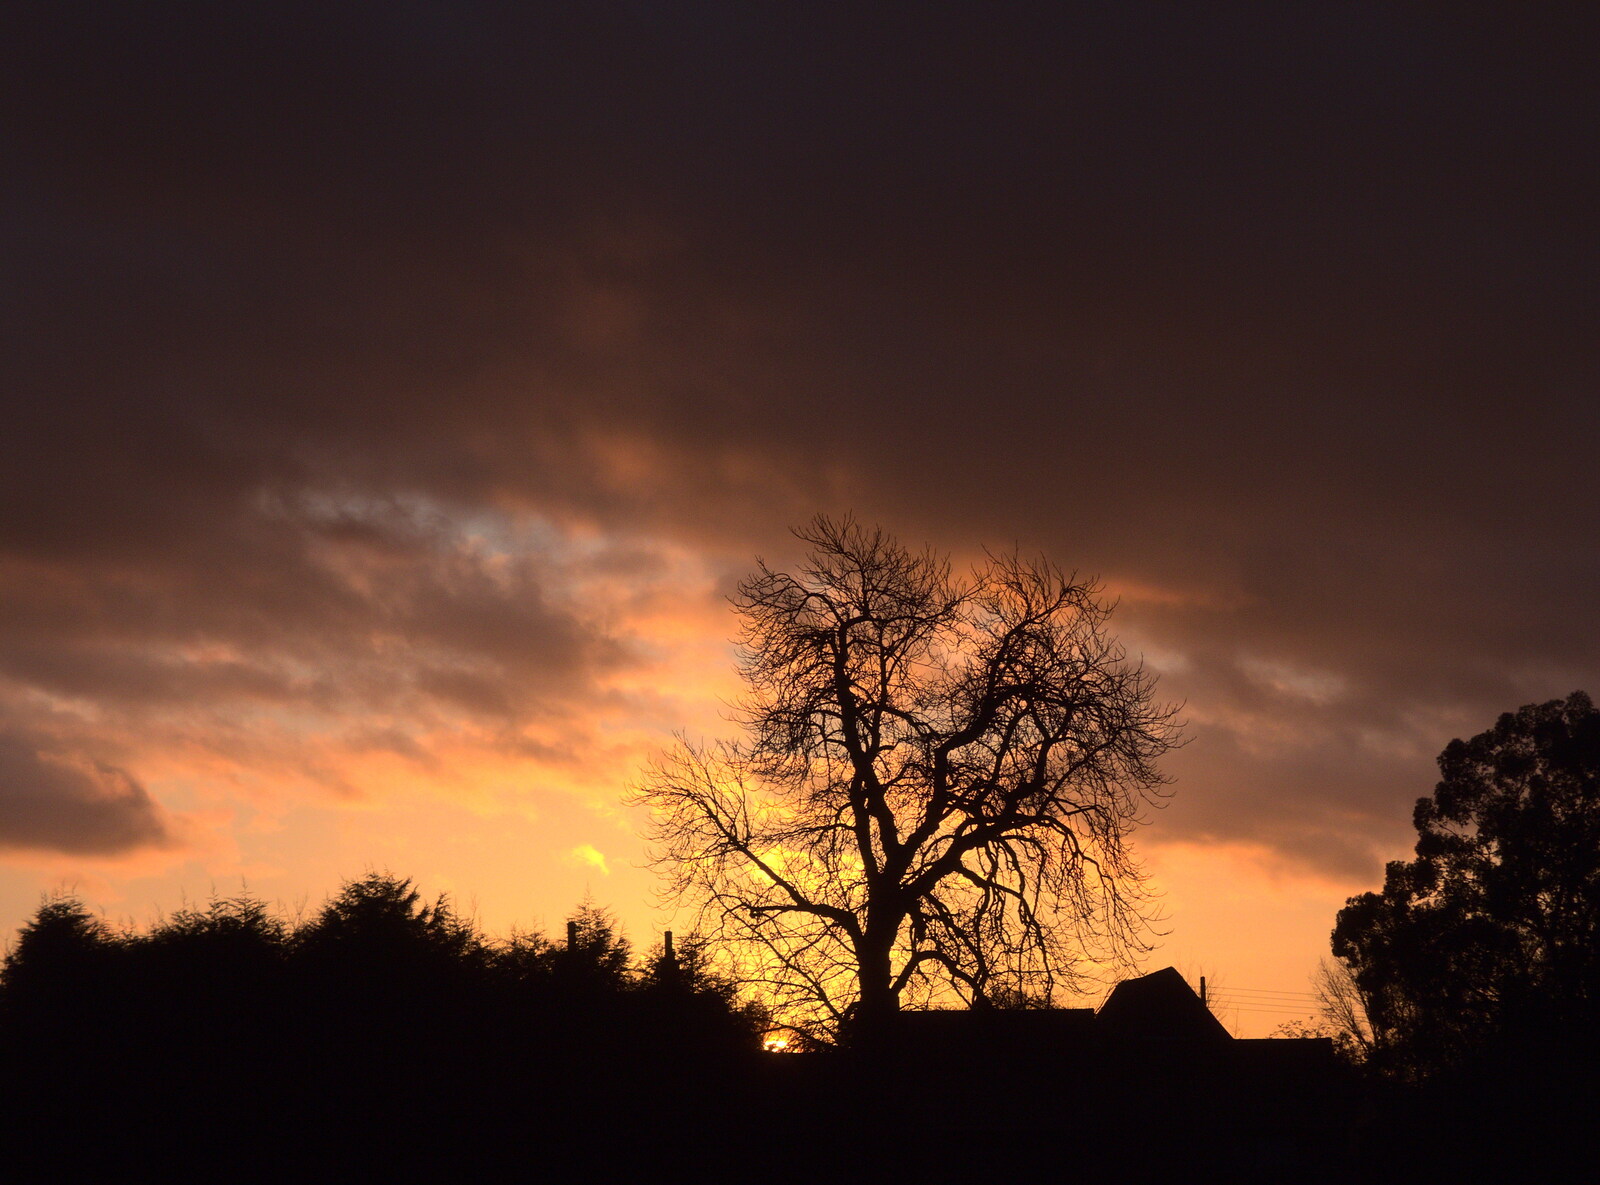 Sunset under glowering skies from A Late November Miscellany, Diss, Brantham and London - 30th November 2017